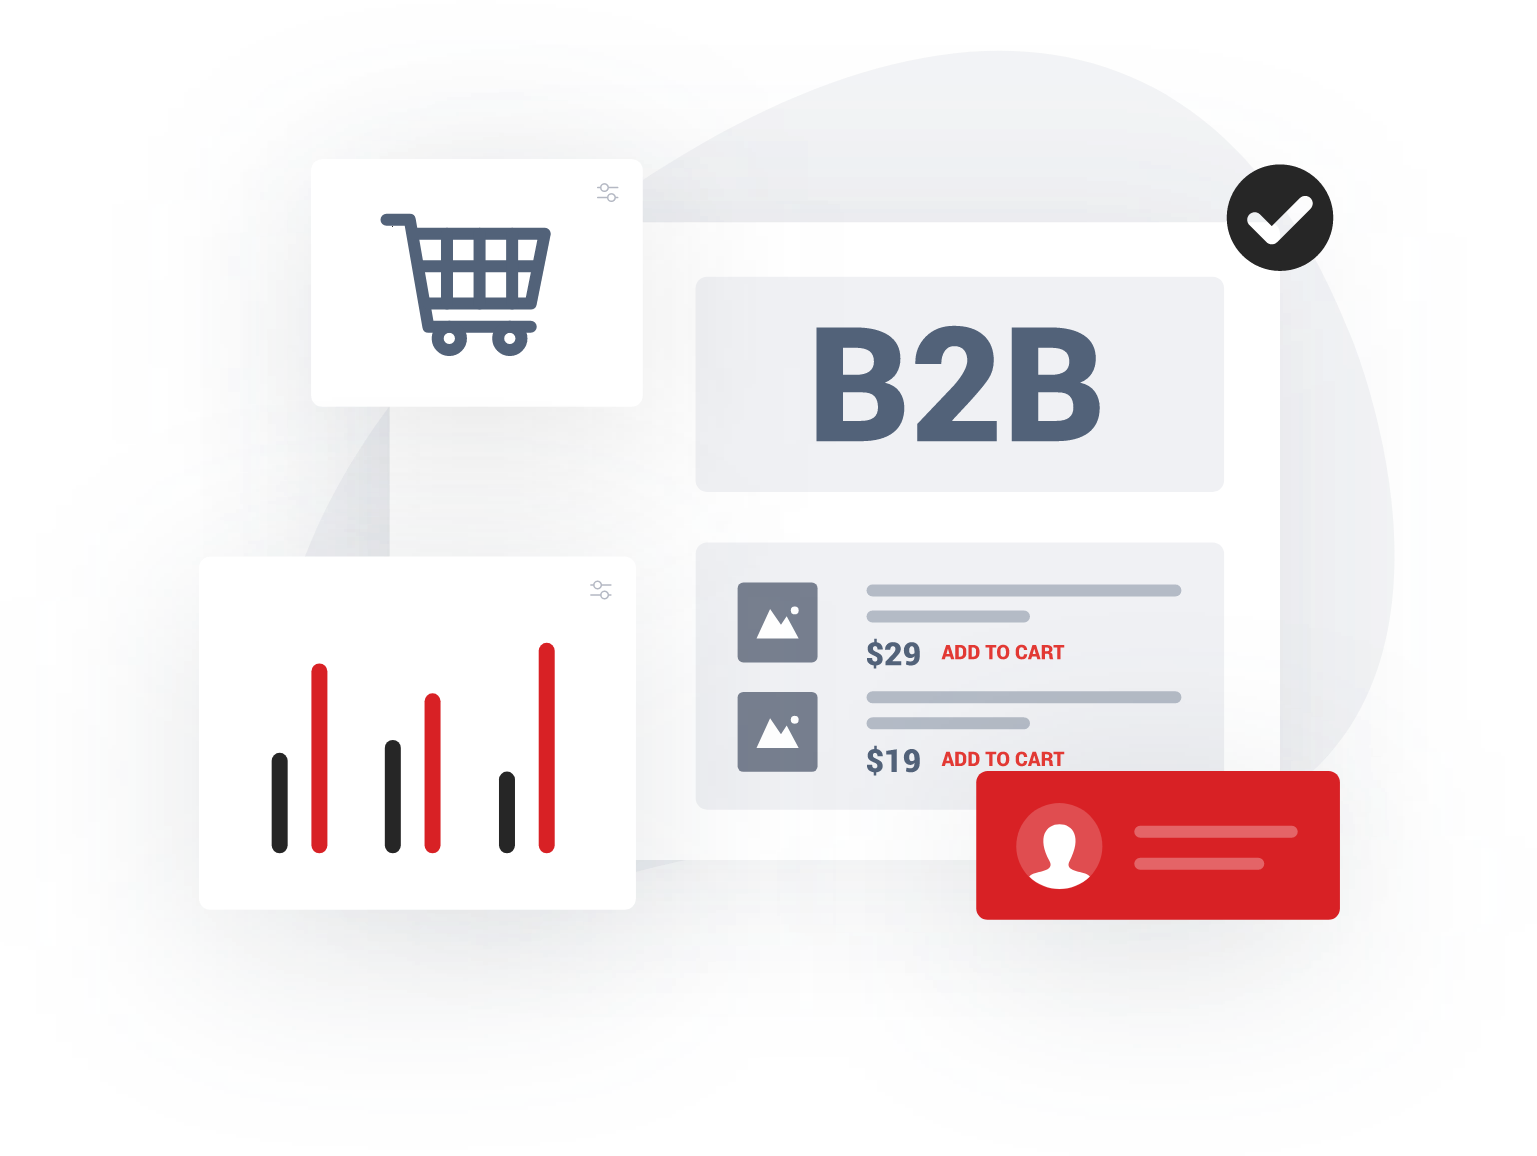 Make your B2B experience better